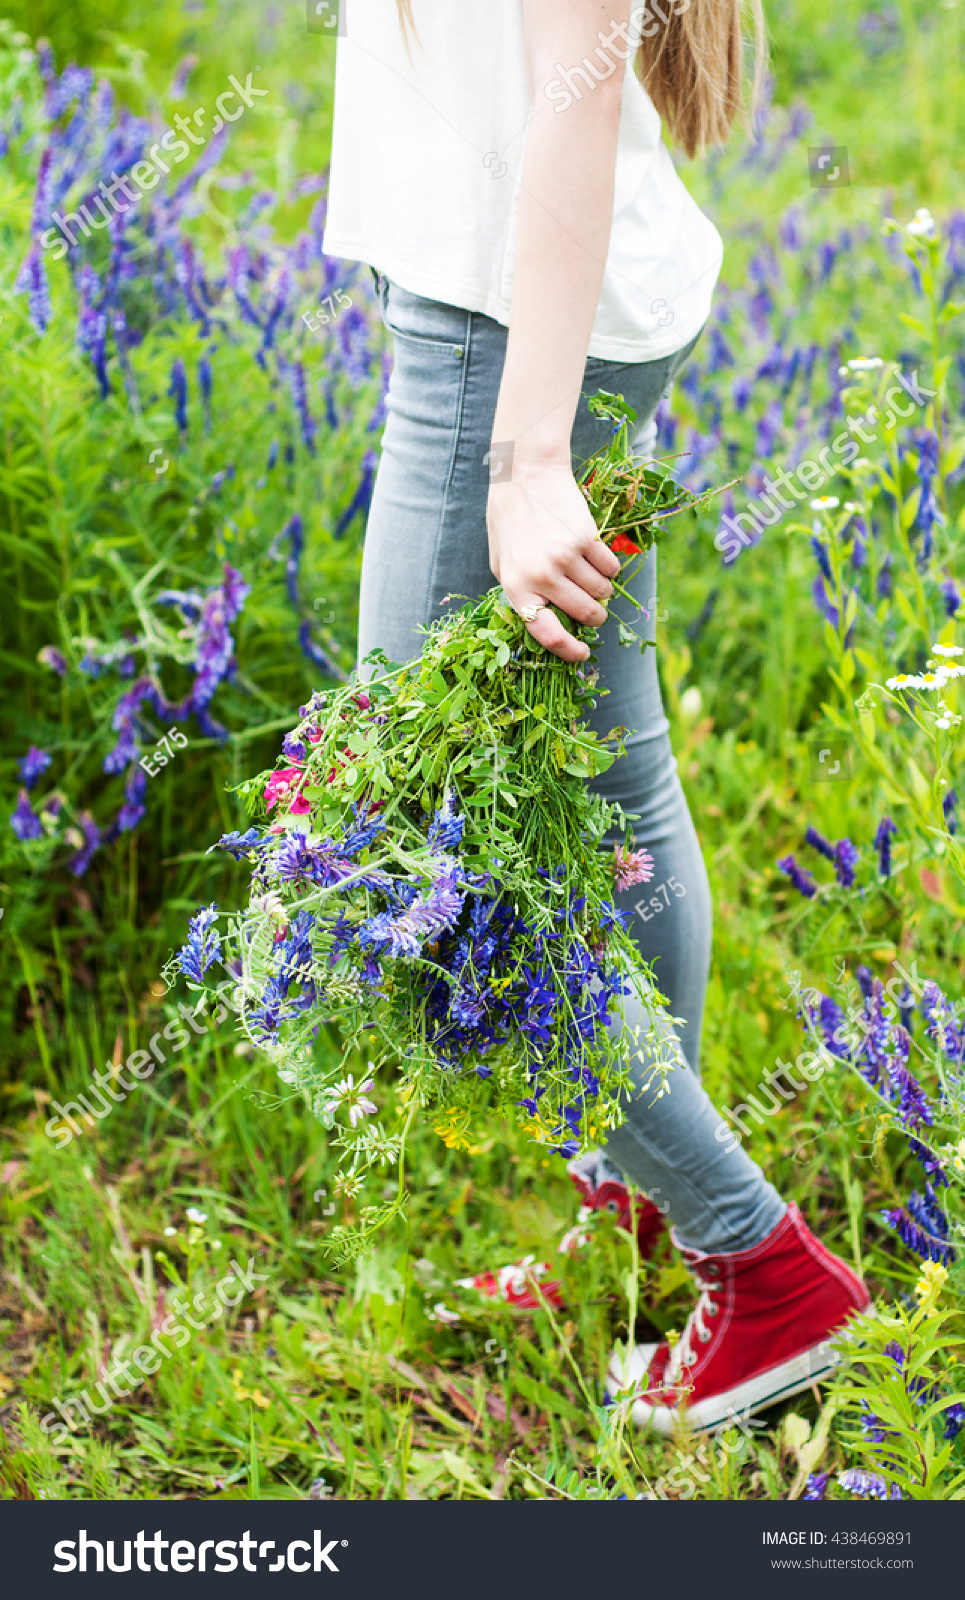 girl holding a bouquet of wildflowers - arms and legs close-up #438469891